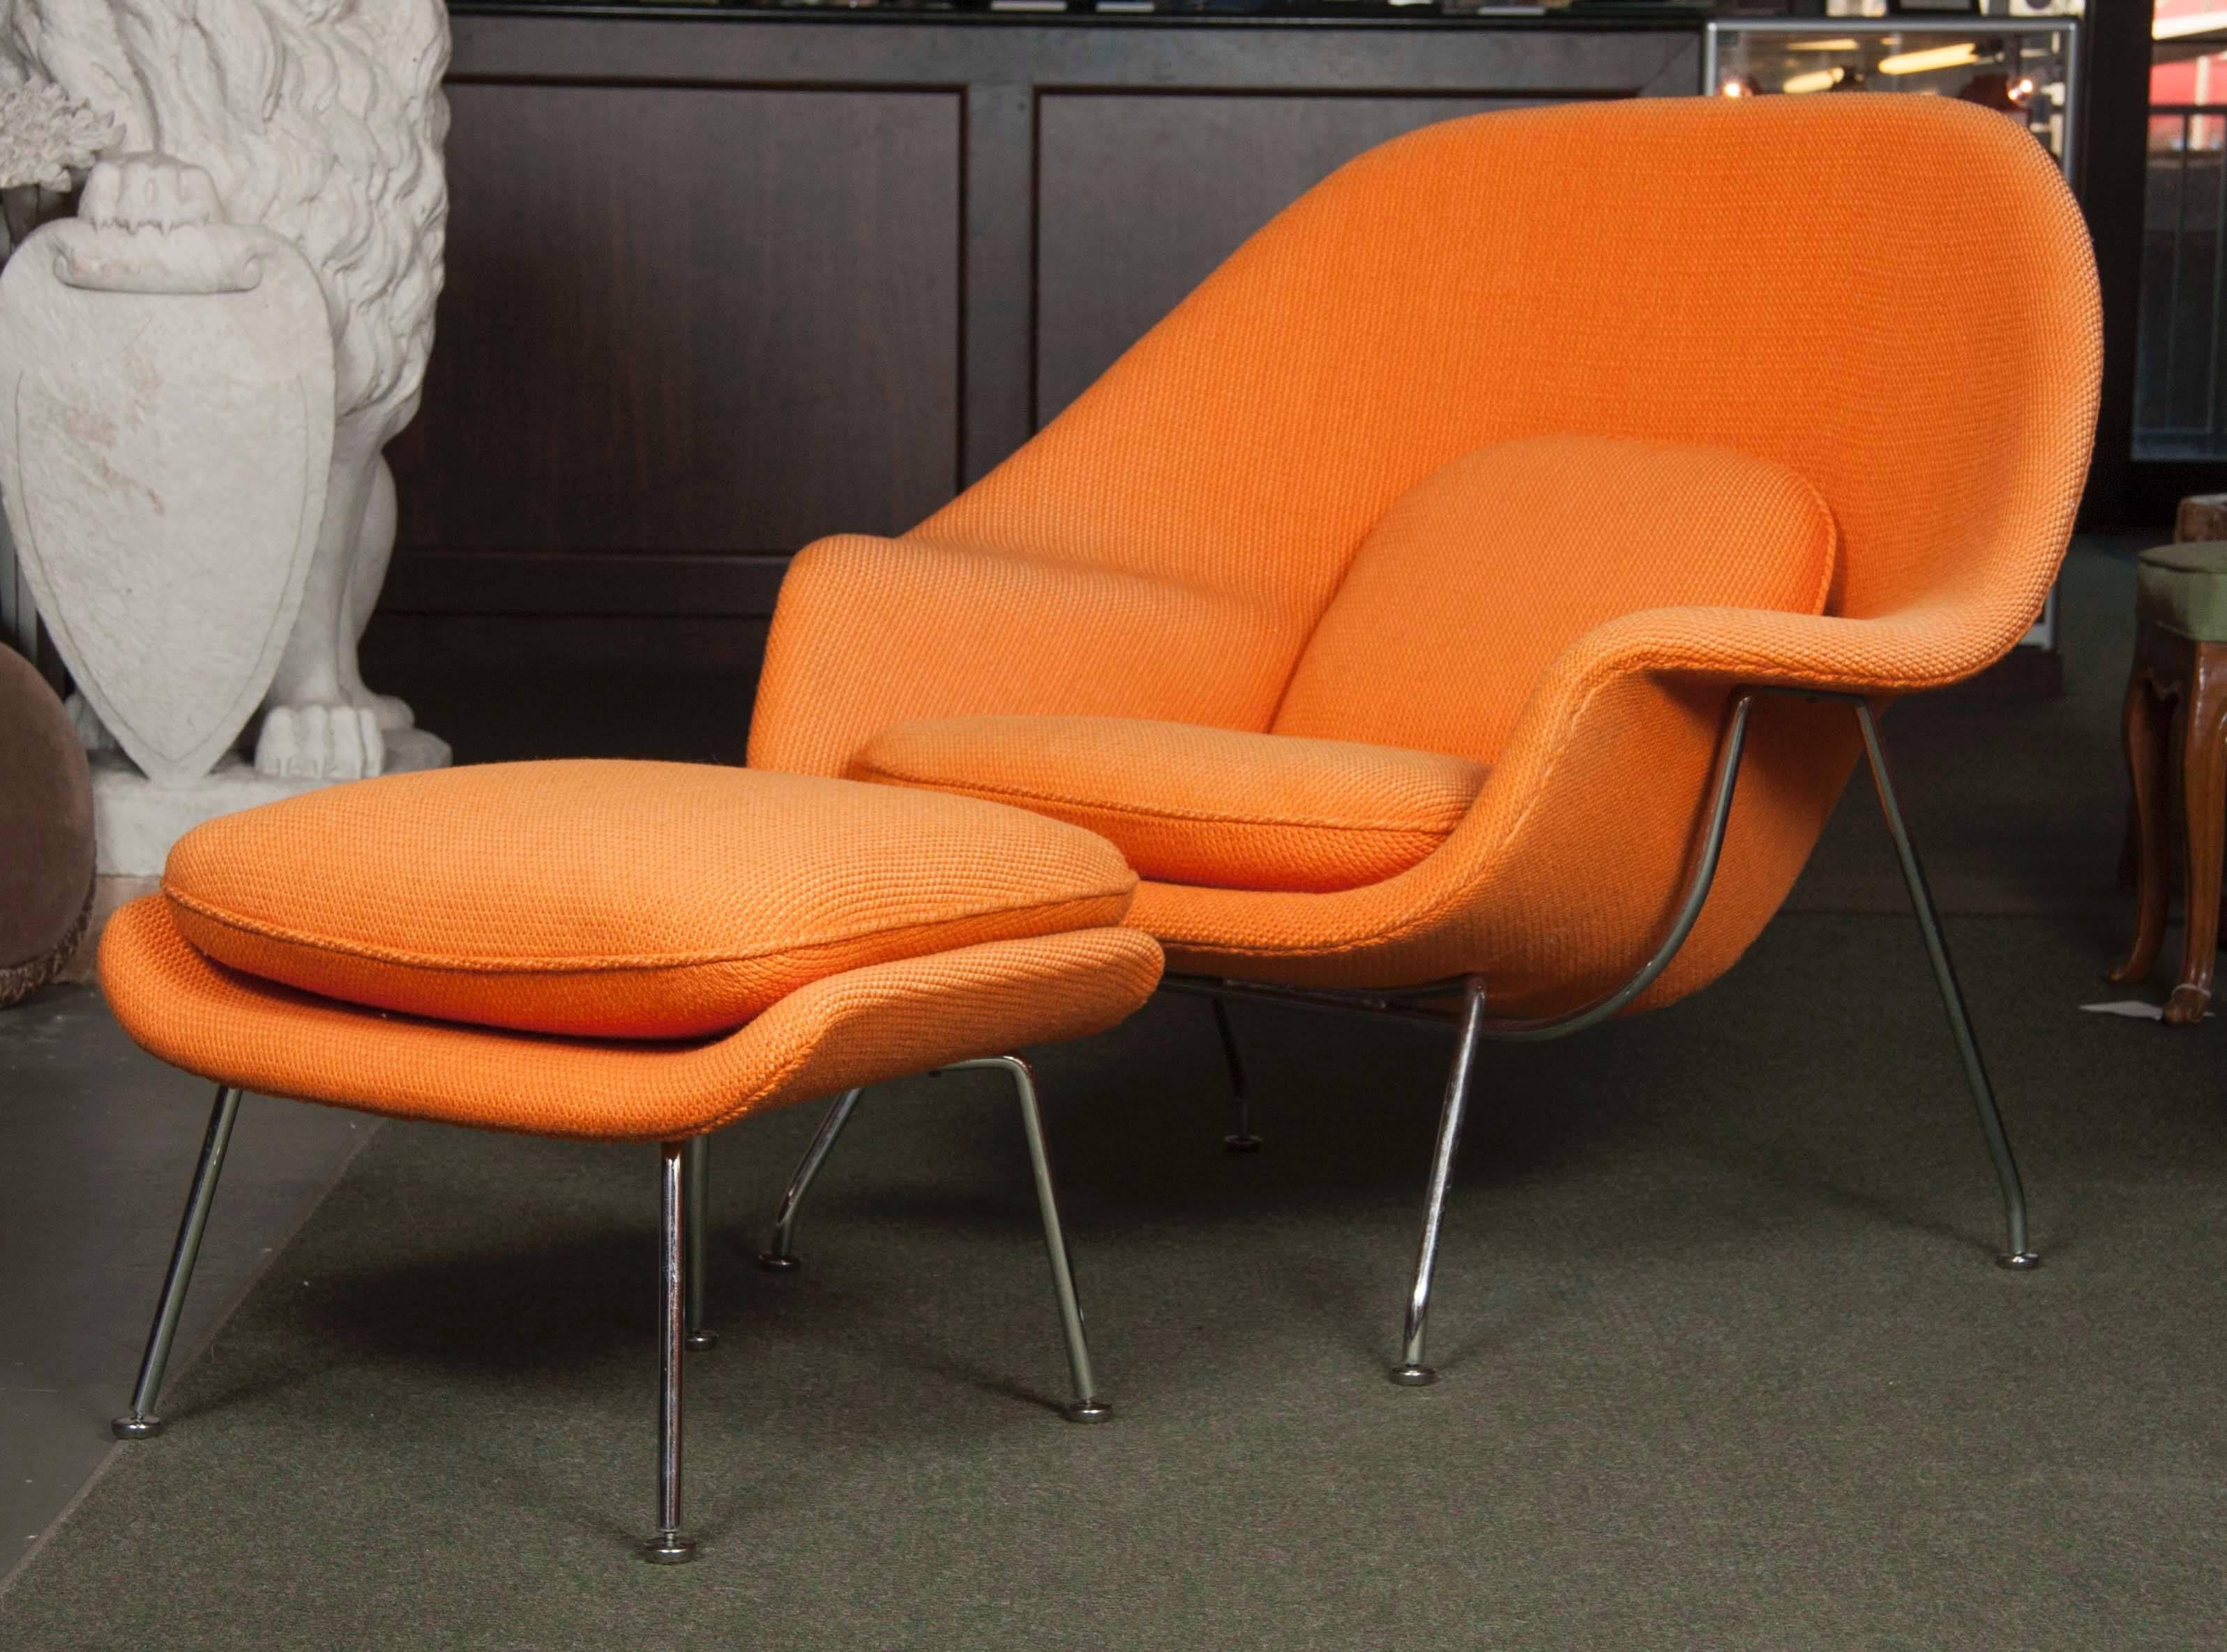 Great Eero Saarinen 'Womb' chair and ottoman for Knoll of plated steel and light orange upholstery.
Seat height: 16